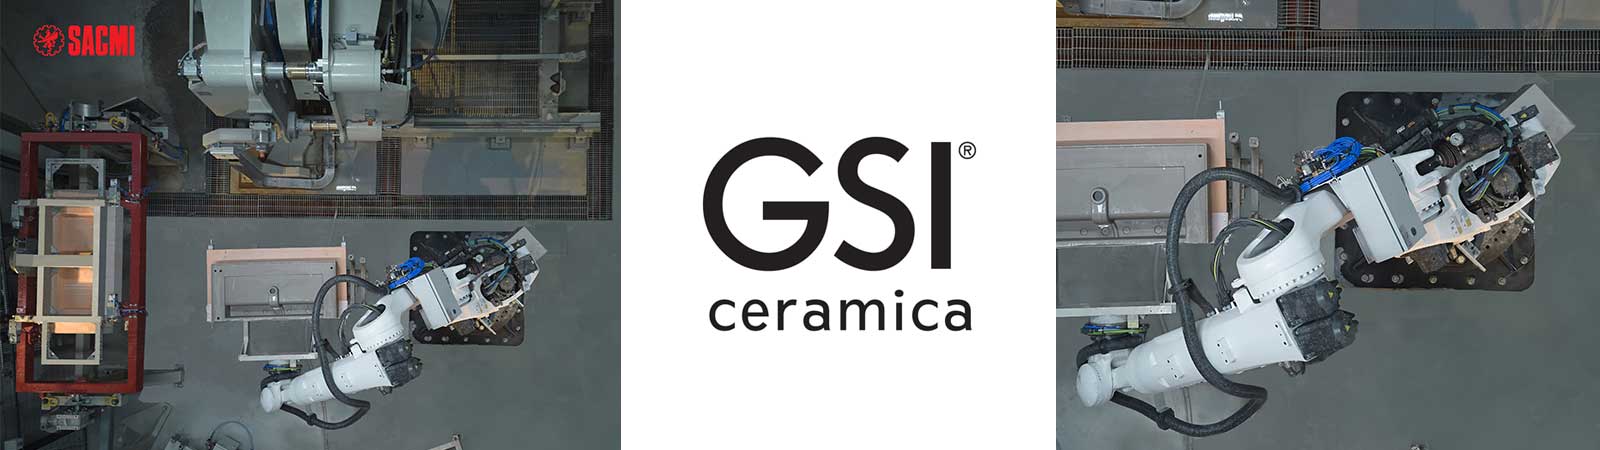 GSI Ceramica adds 5th SACMI ADM to machine fleet for production of washbasins and consoles